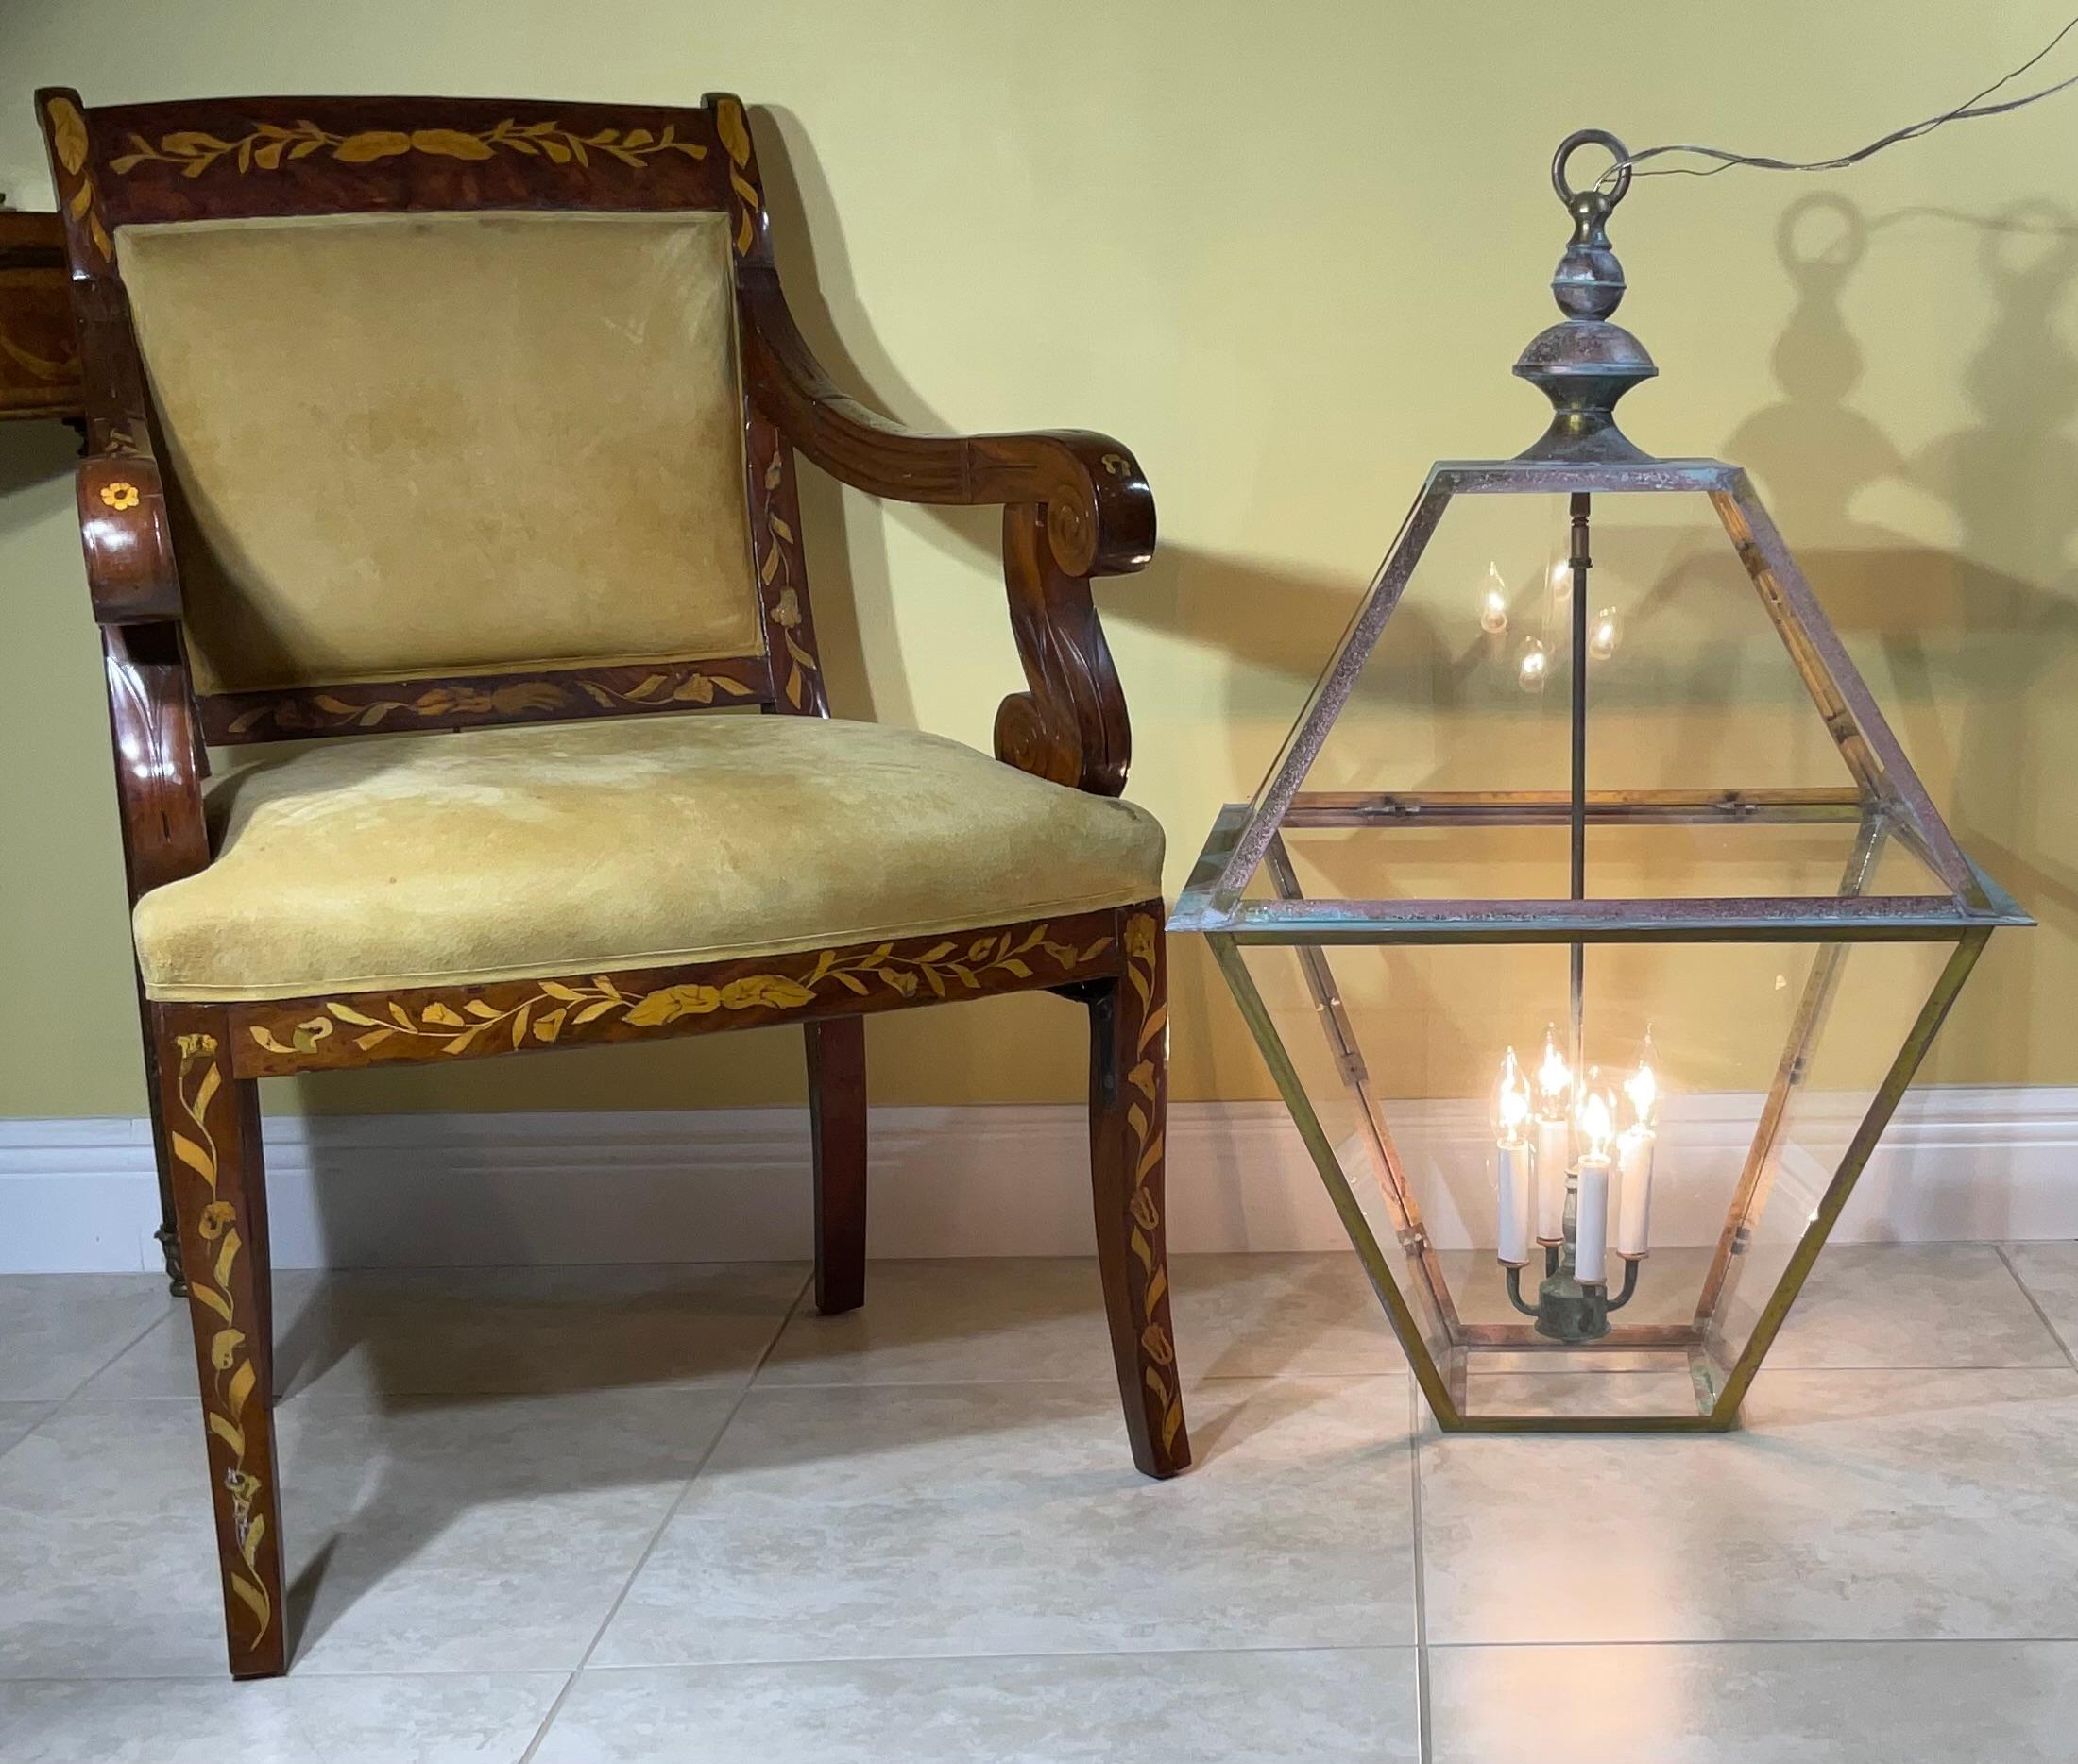 Elegant large hanging lantern made of handcrafted brass, Measures: 22” x 22” x 36”
With four 60/watt lights, suitable for hanging in wet location, Ready to use.
Matching canopy included.
Because the large size of the lantern, Shipping will be in